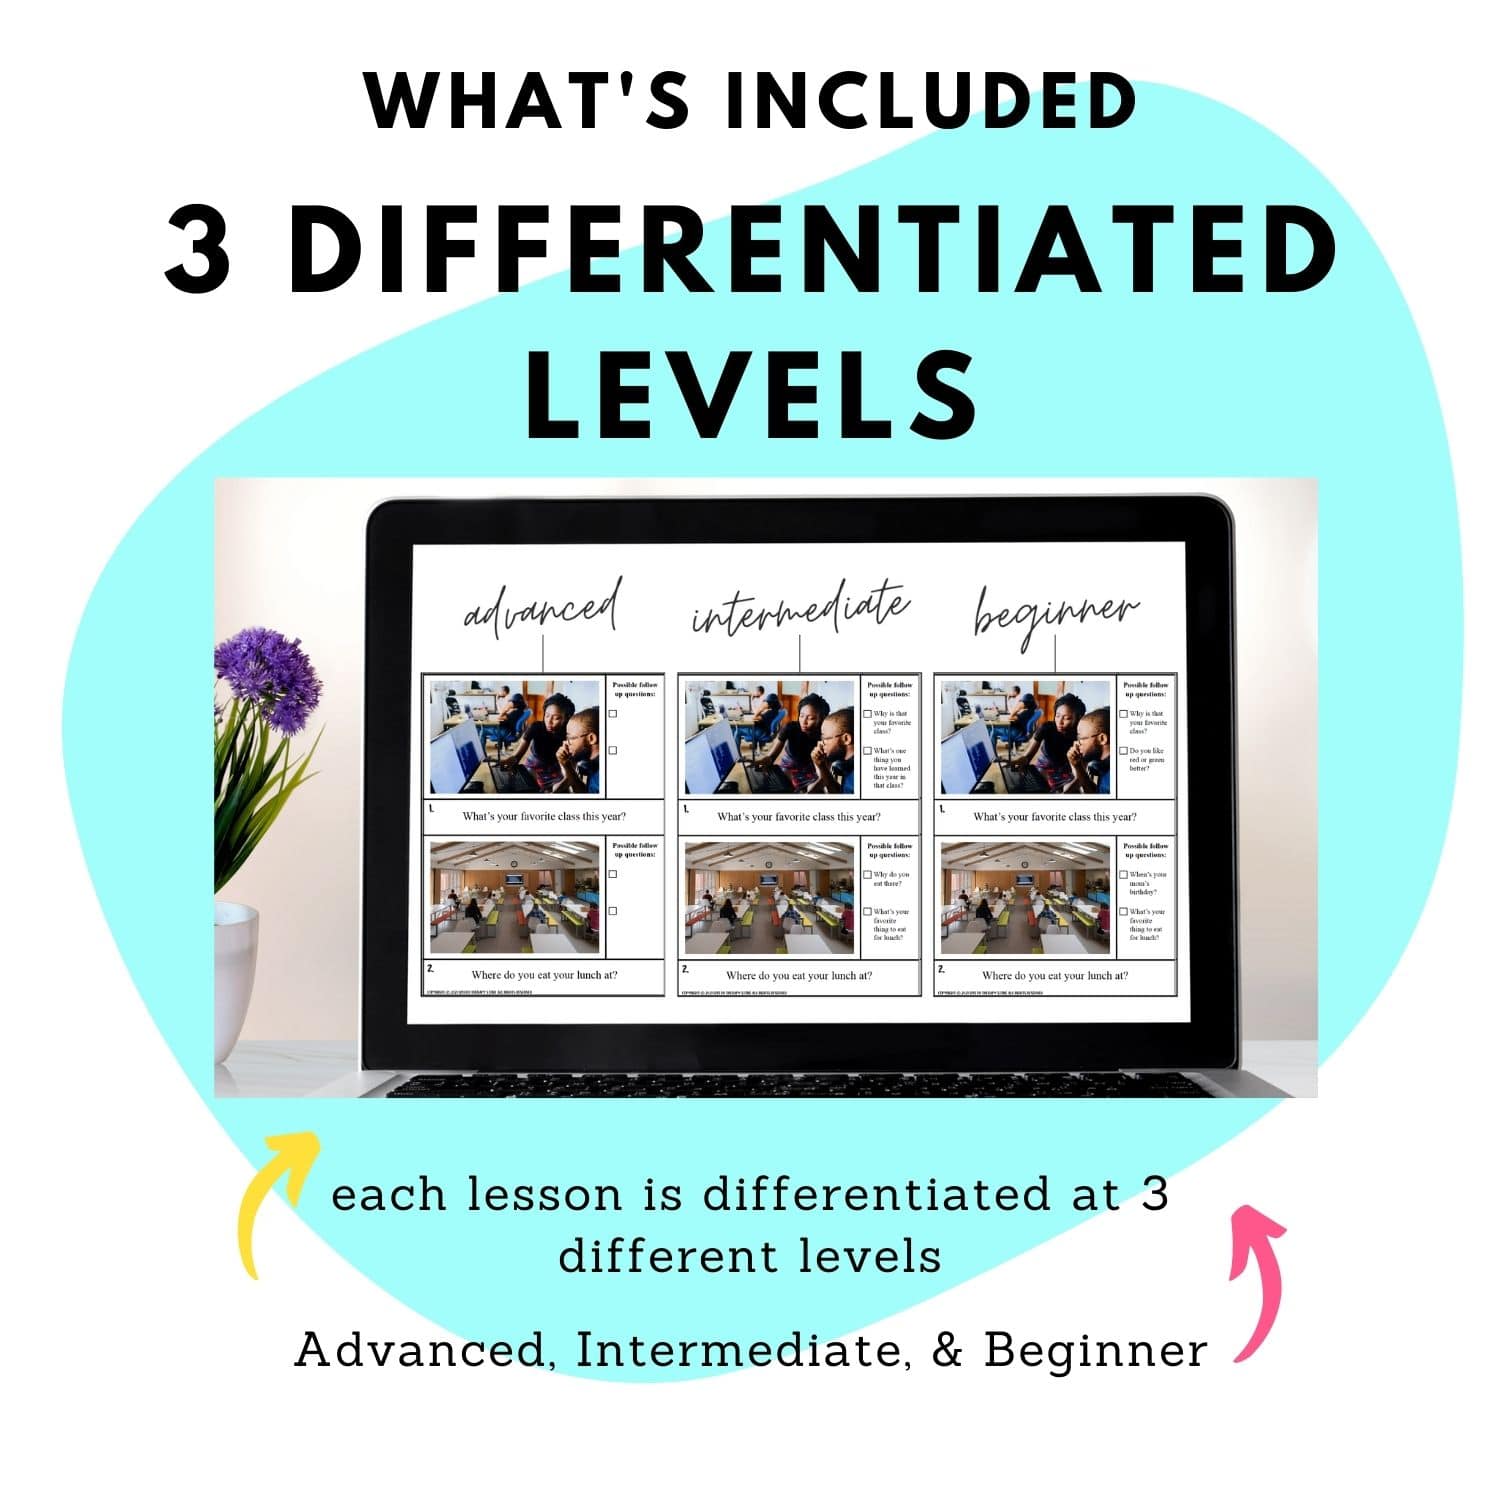 asking questions differentiated levels